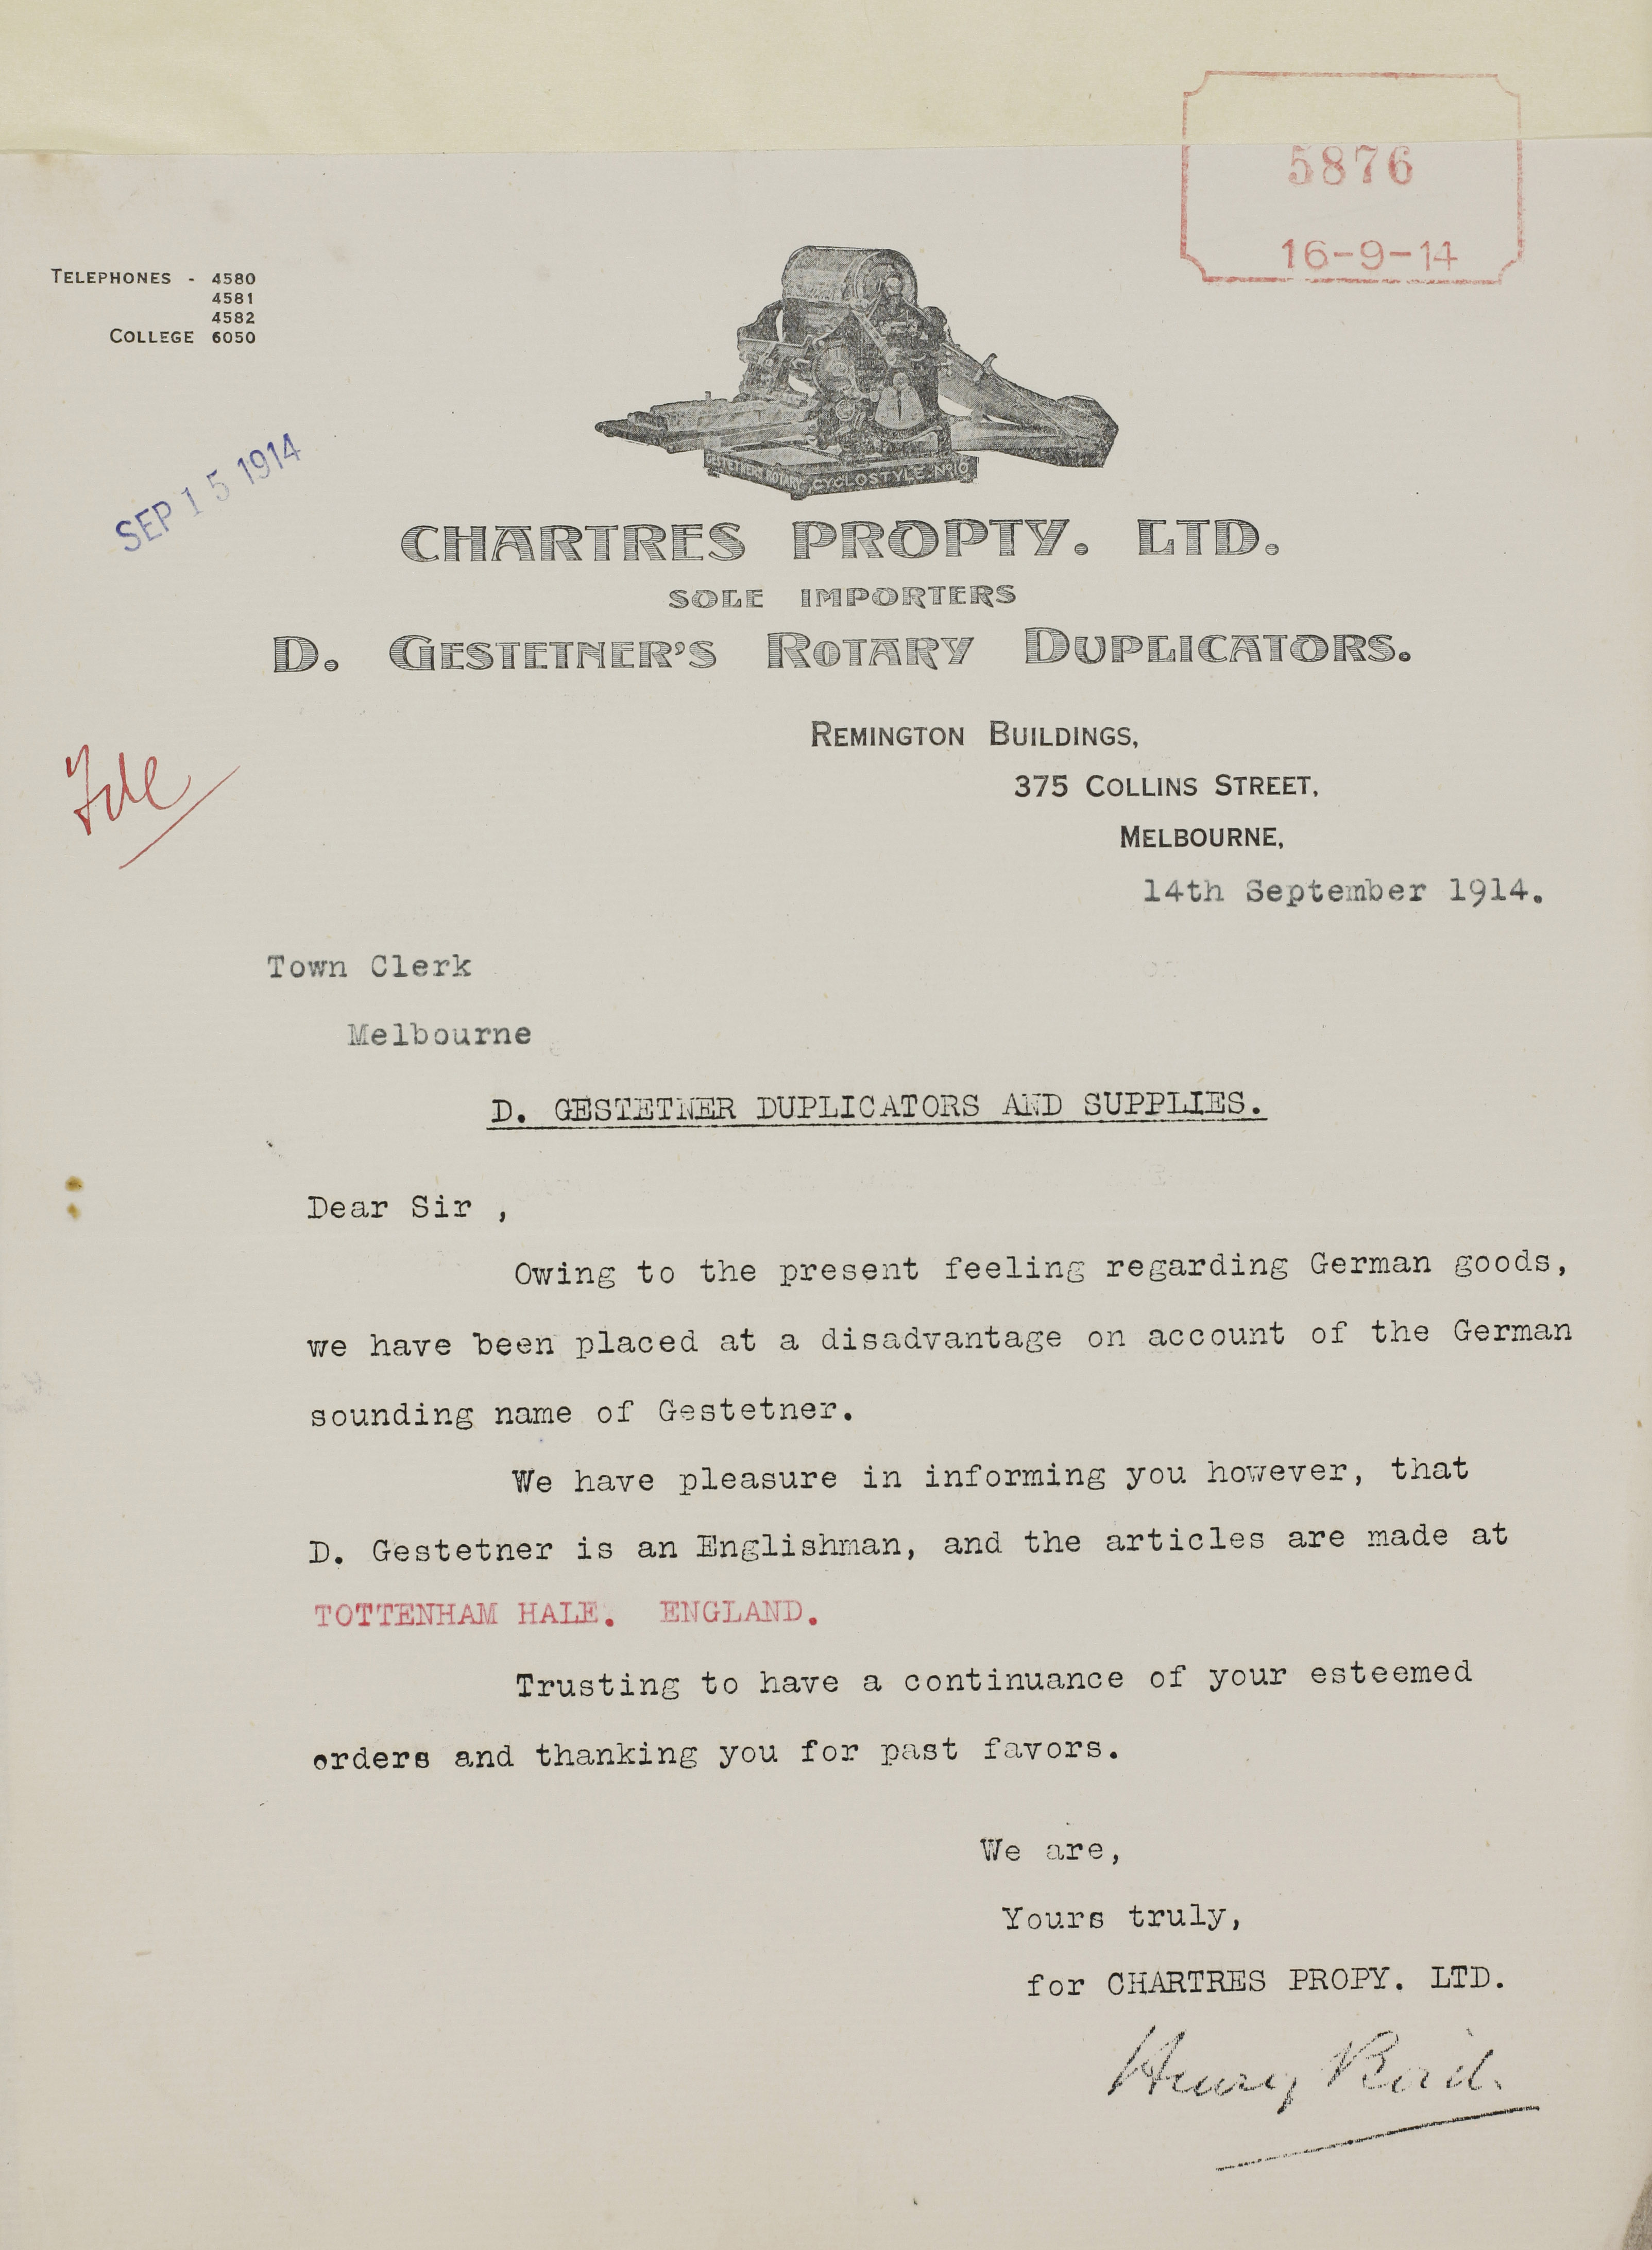 Image of letter from Chartres Pty Ltd, 14 September 1914.